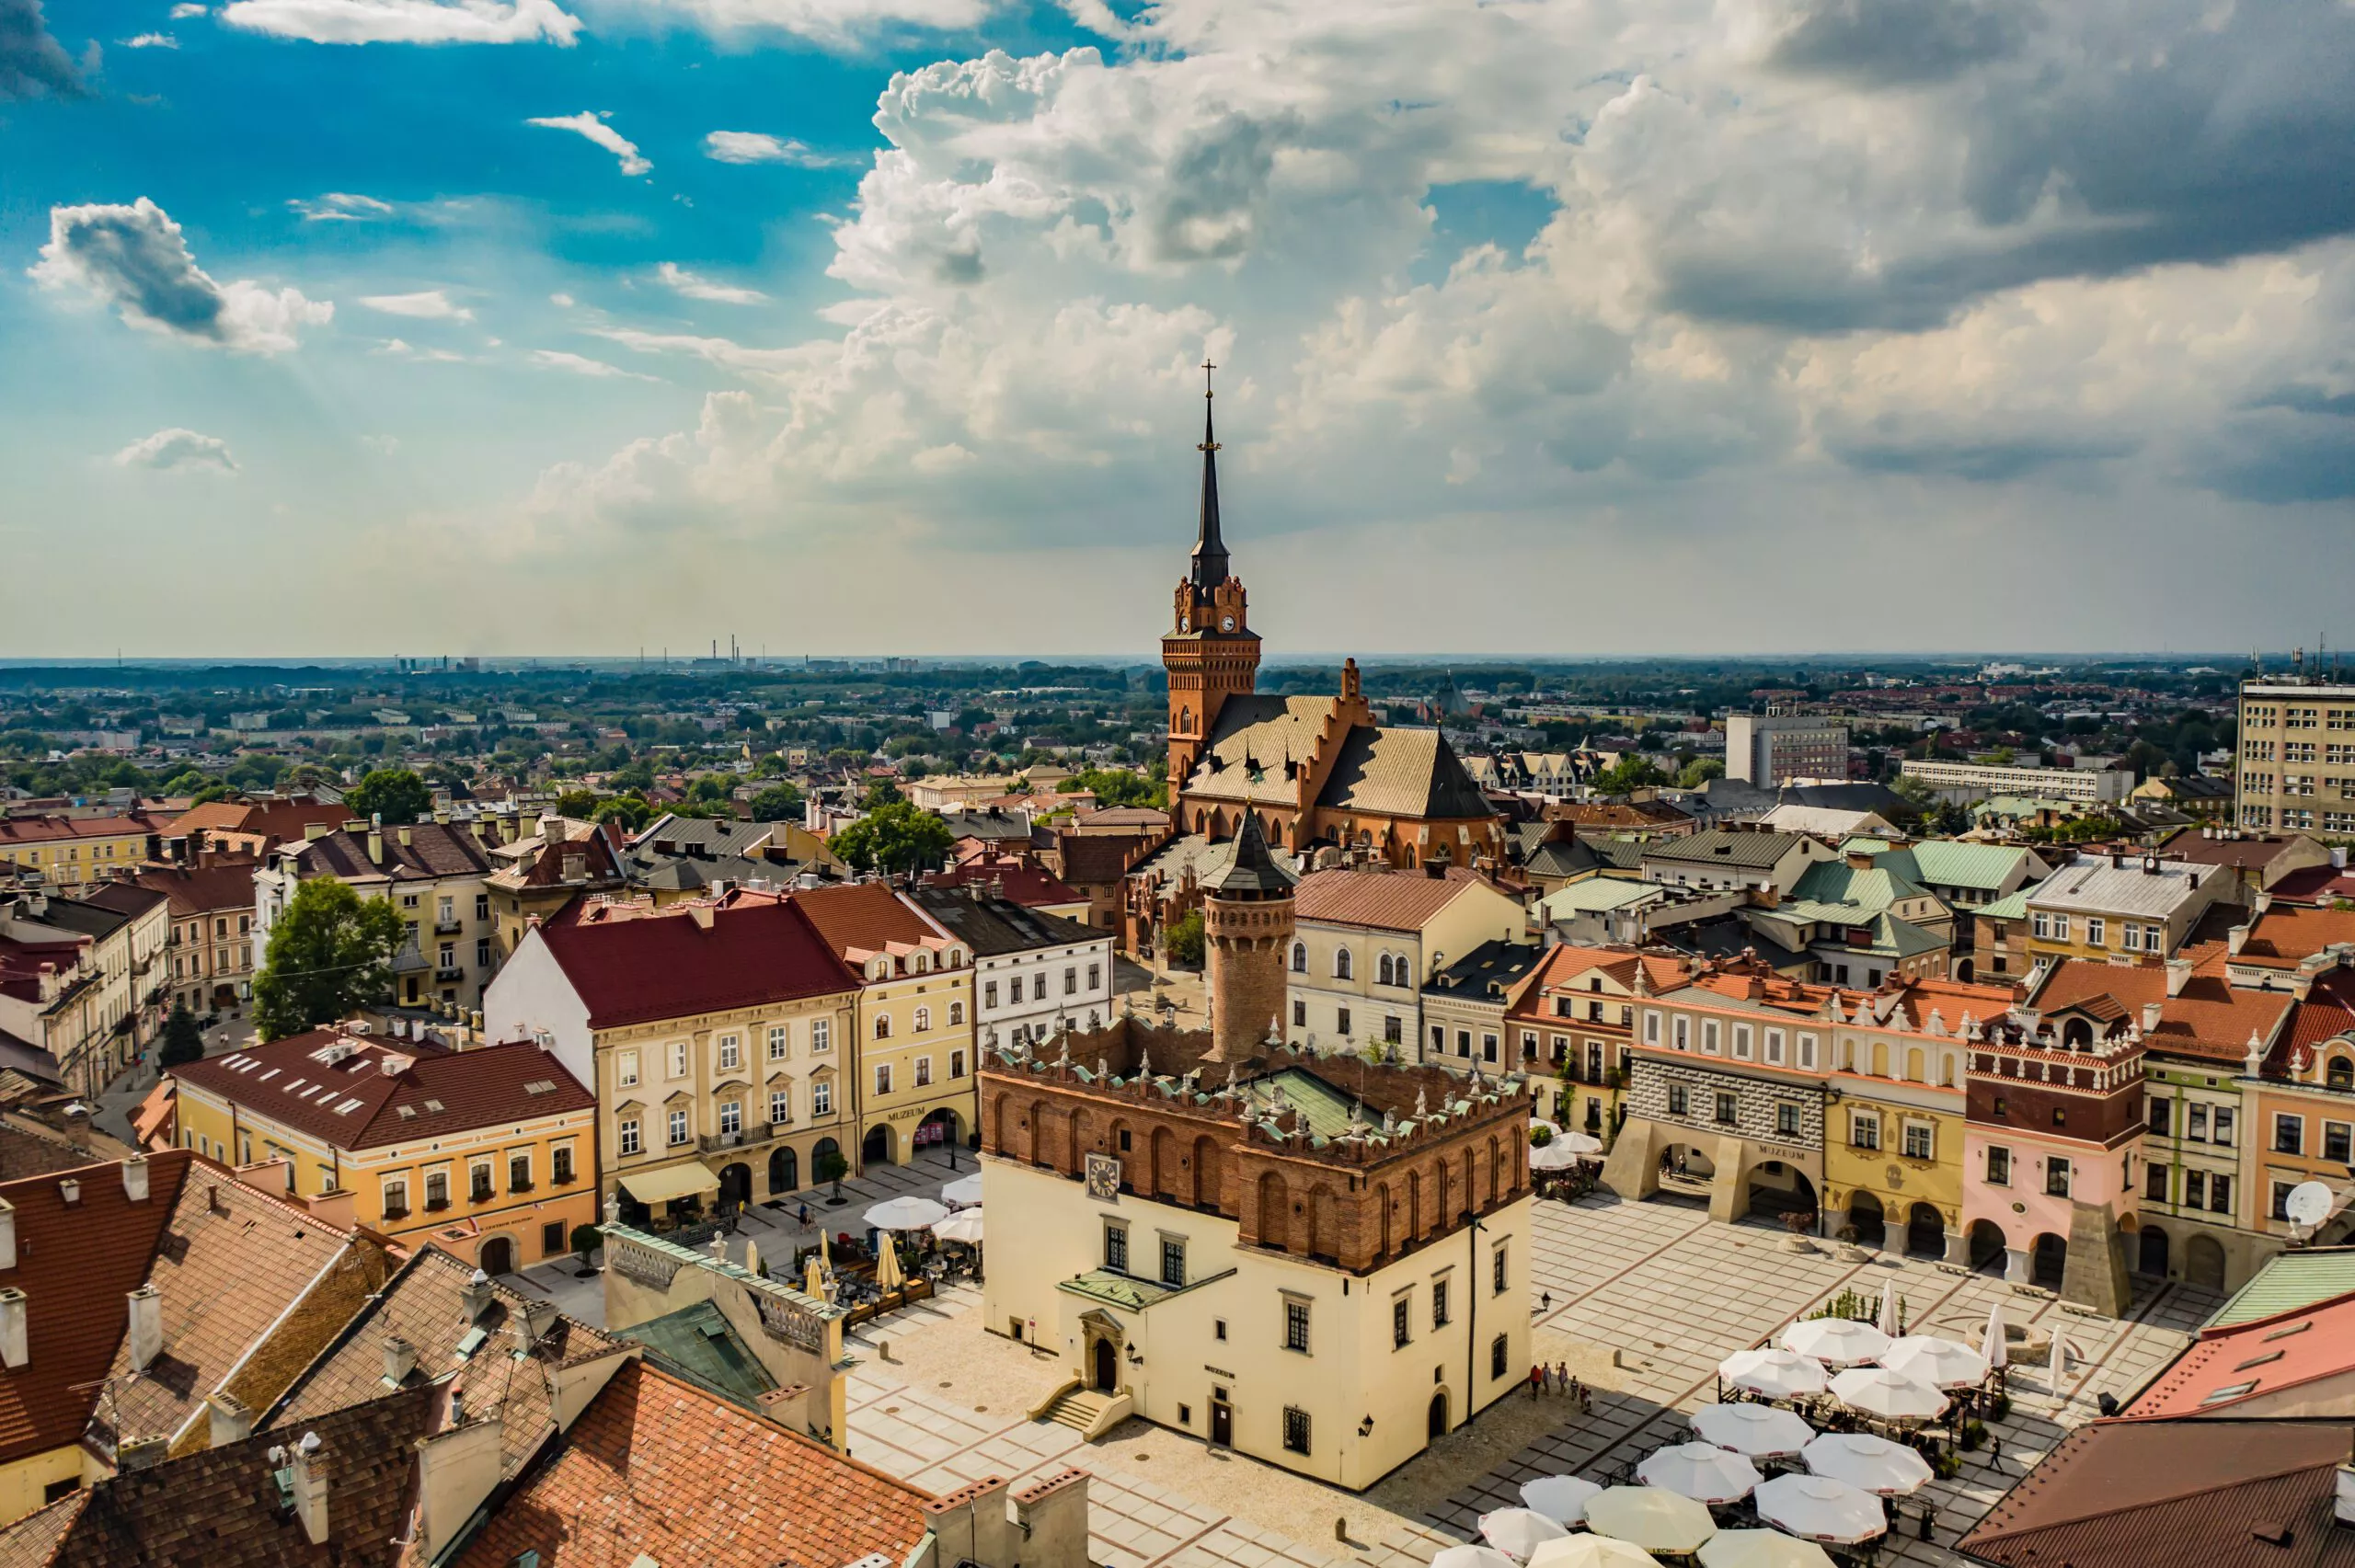 An aerial view of the Tarnów market square. Tarnów town hall stands In the centre of the square, surrounded by townhouses. The whole is dominated by the tall spire of the cathedral soaring from among more townhouses into the white clouds that are visible in the blue sky.